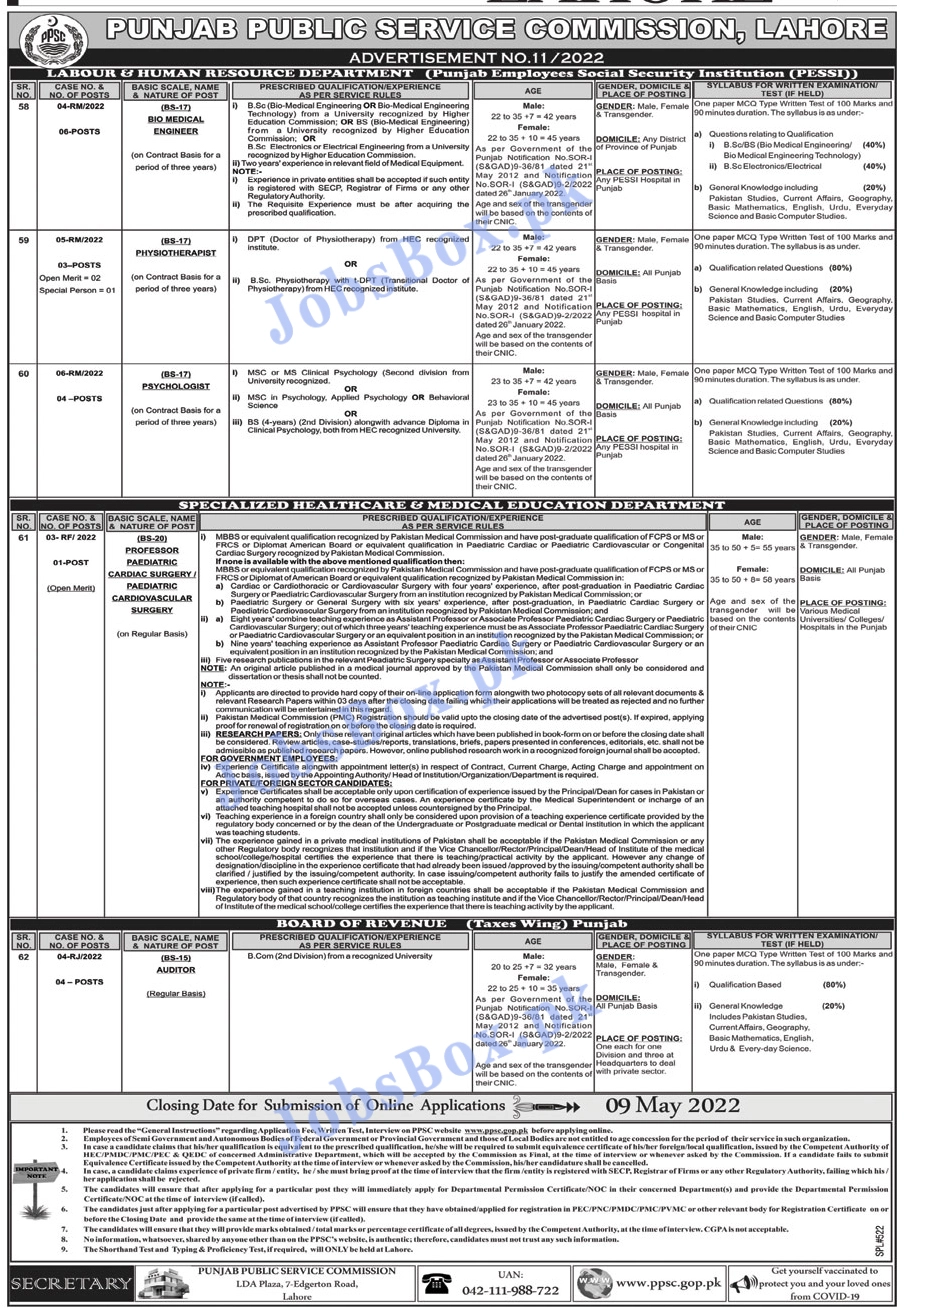 PPSC Jobs 2022 for Punjab Residents Male-Female Online Form